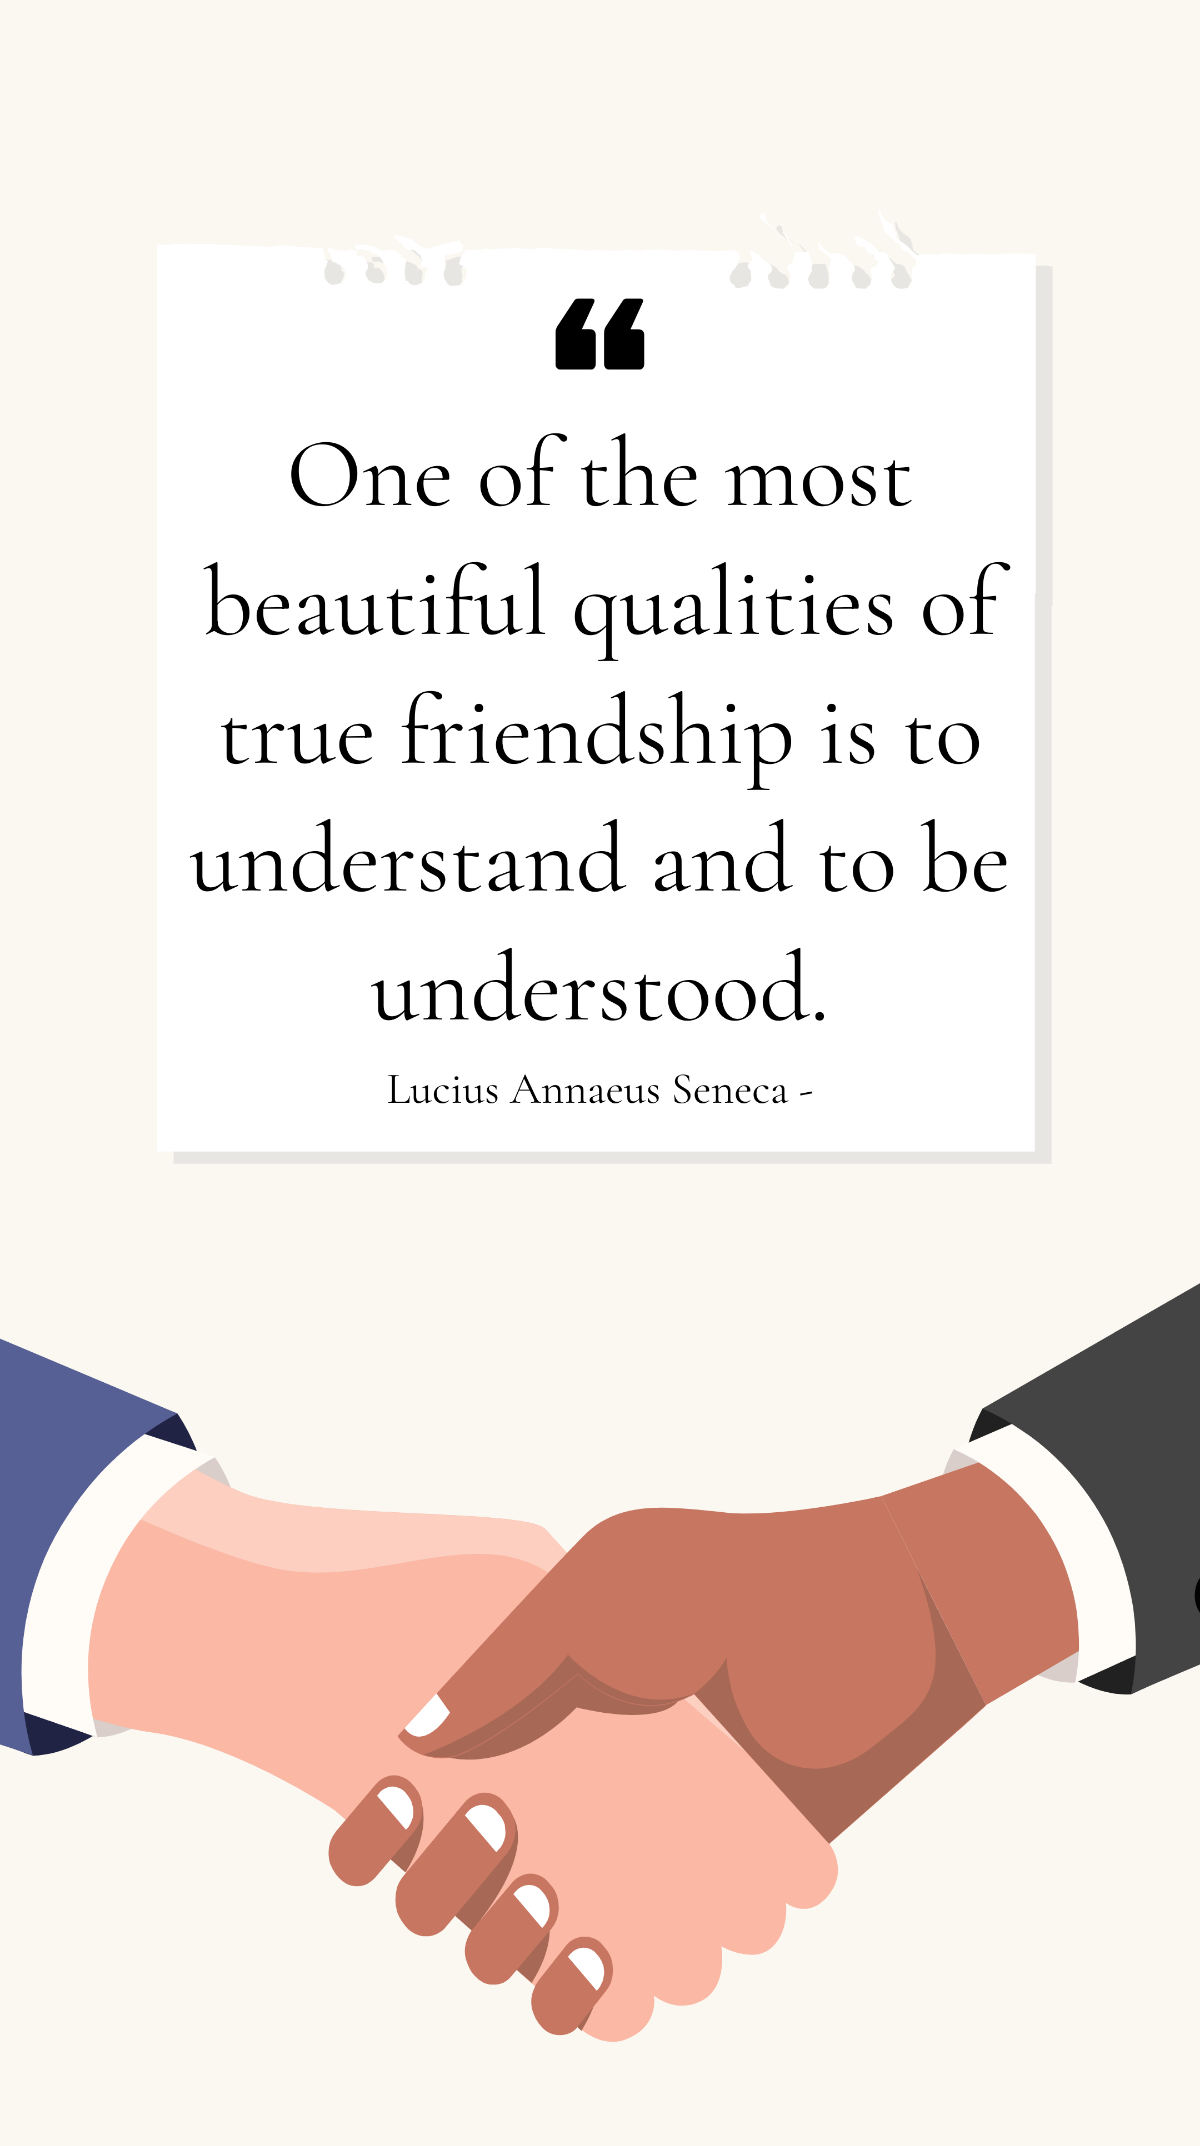 Lucius Annaeus Seneca - One of the most beautiful qualities of true friendship is to understand and to be understood. Template